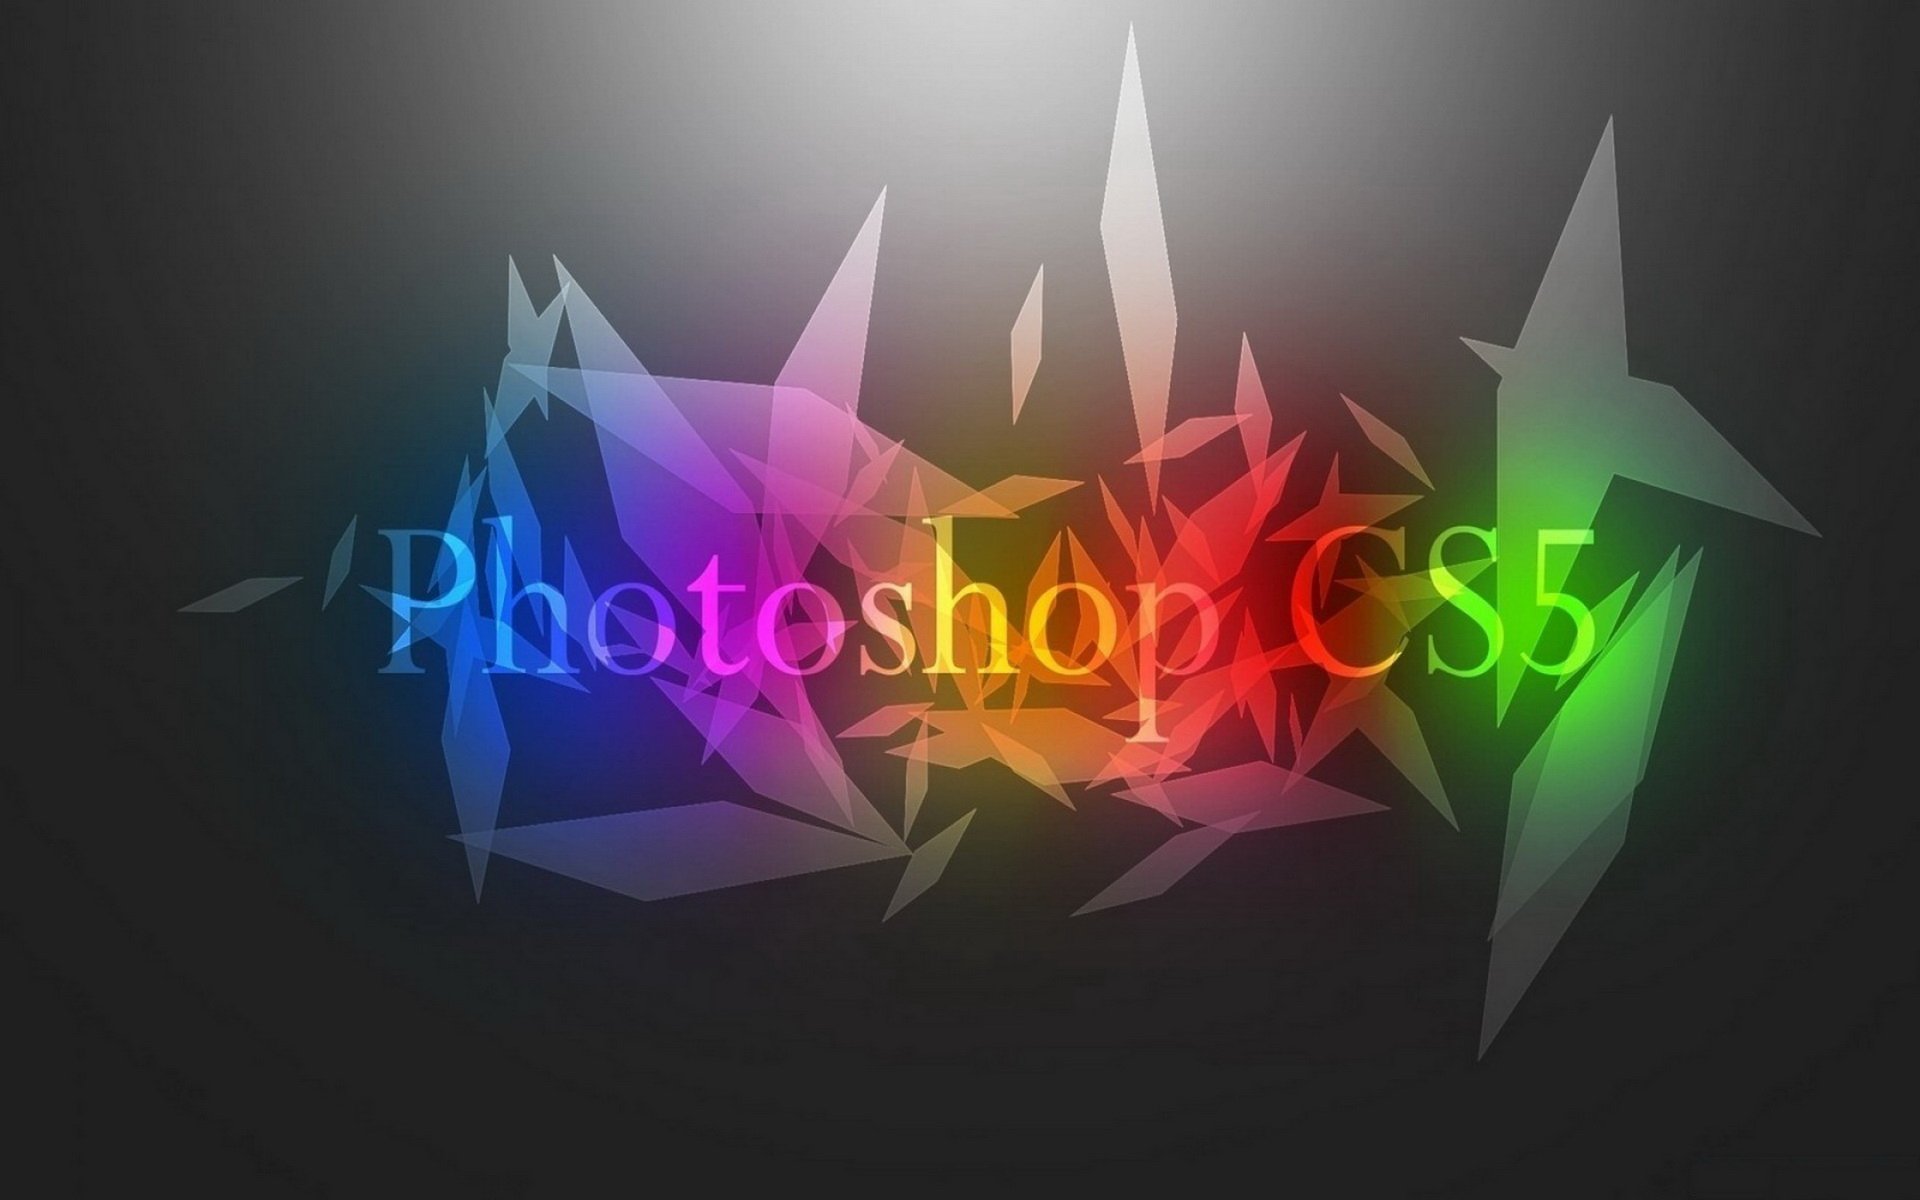 Photoshop 4k uhd 16:9 wallpapers hd, desktop backgrounds 3840x2160, images  and pictures